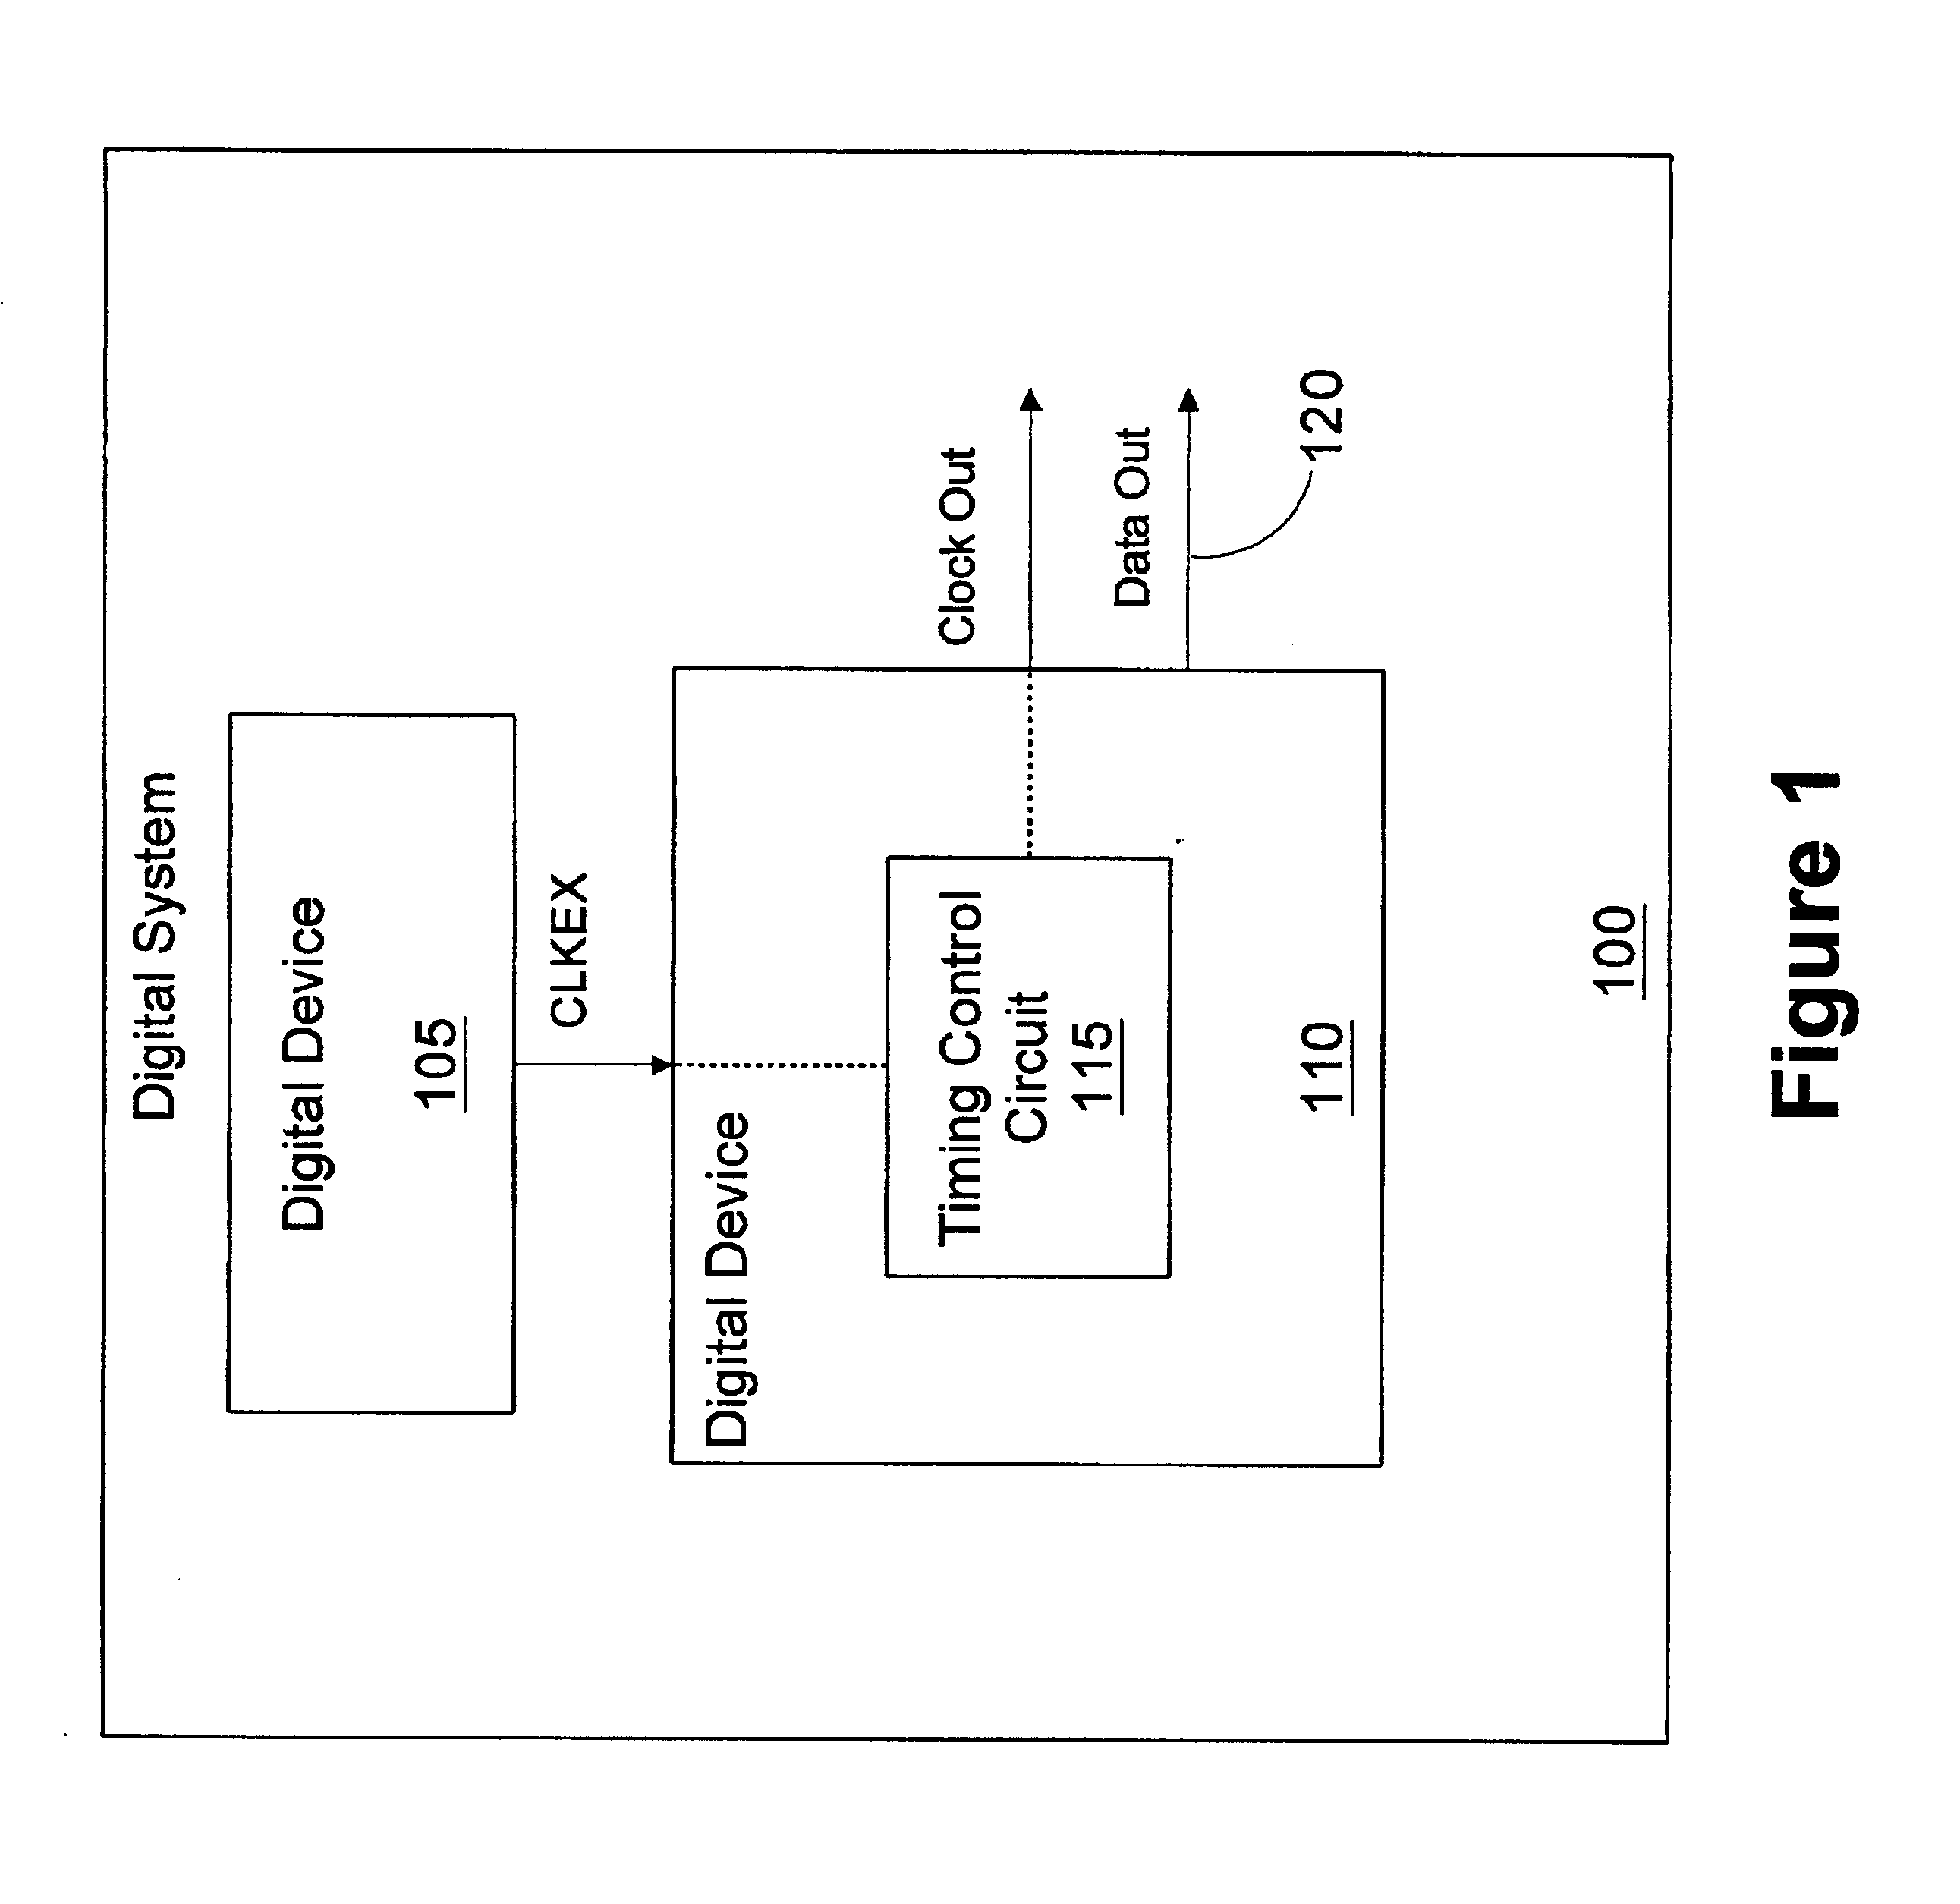 Method and apparatus for enabling a timing synchronization circuit